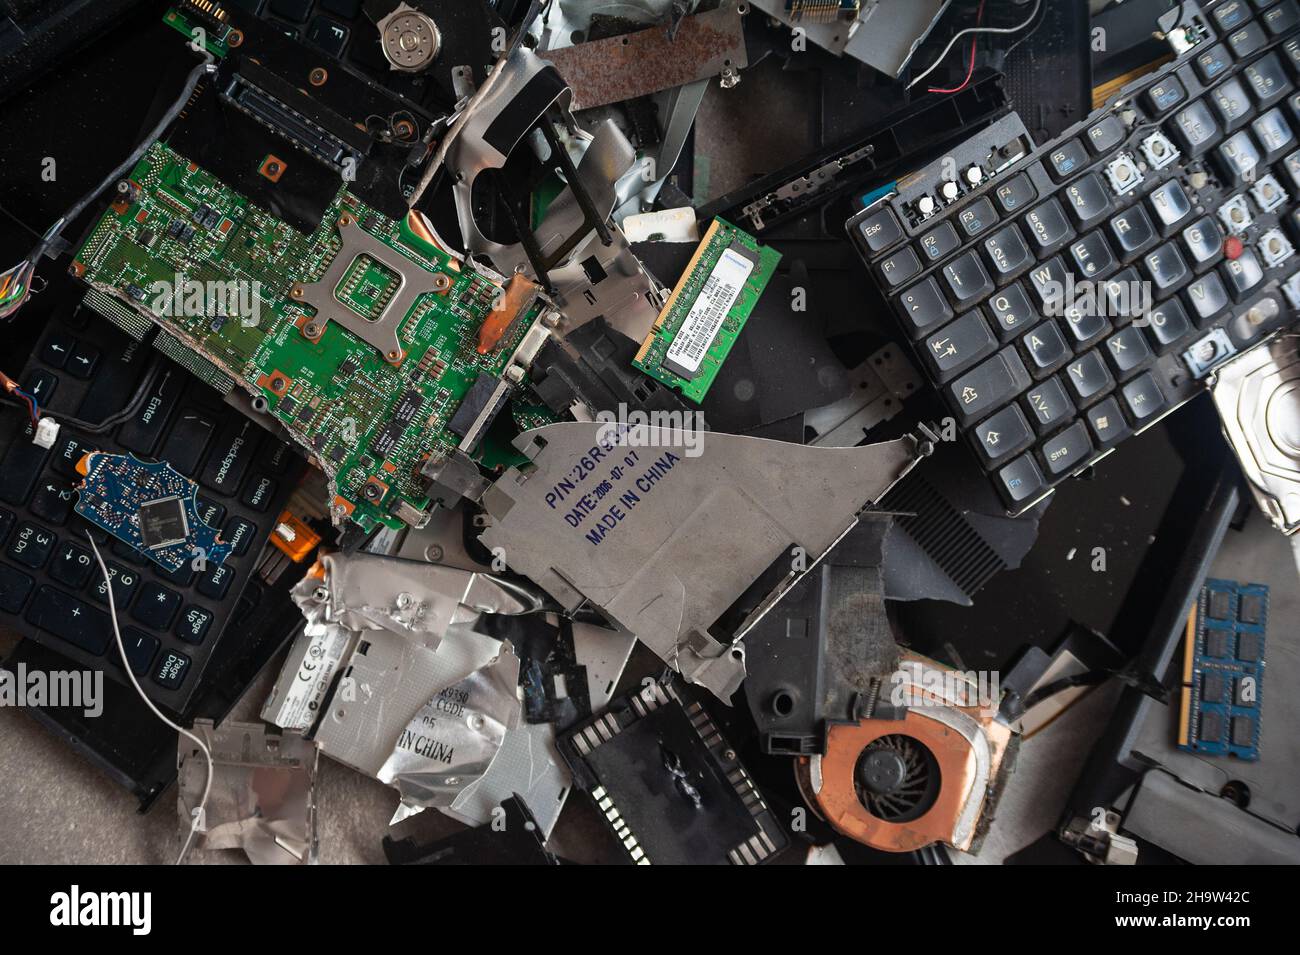 Discarded computers and such nyt